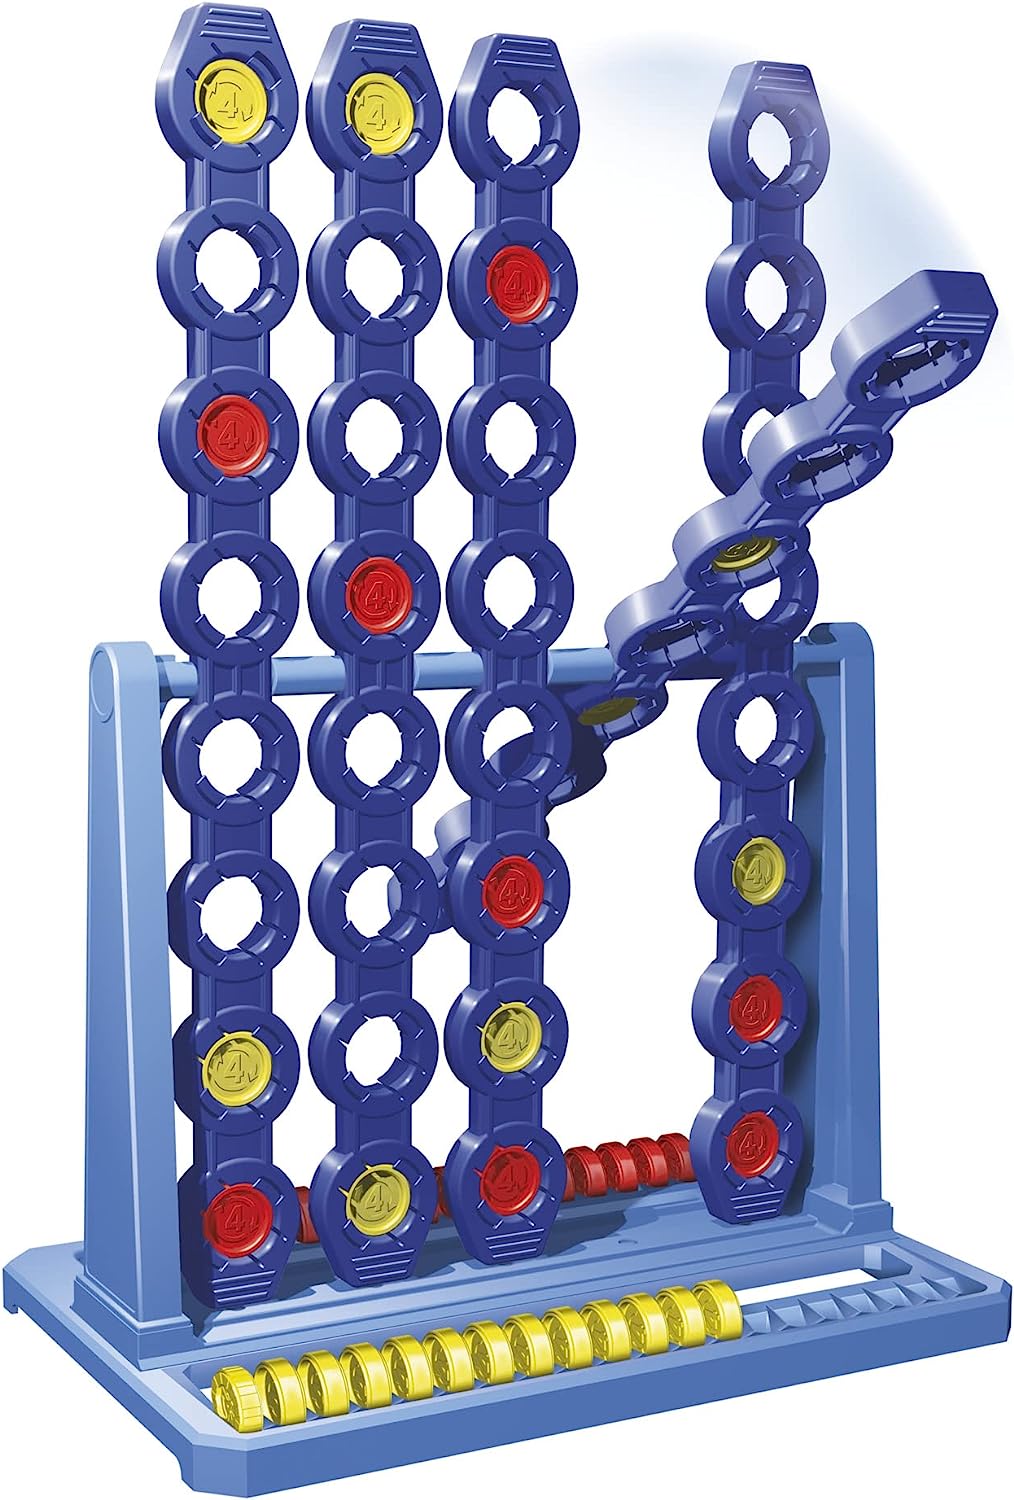 Connect 4 Spin Game, Features Spinning Connect 4 Grid, 2 Player Board Games for Family and Kids, Strategy , Ages 8 and Up